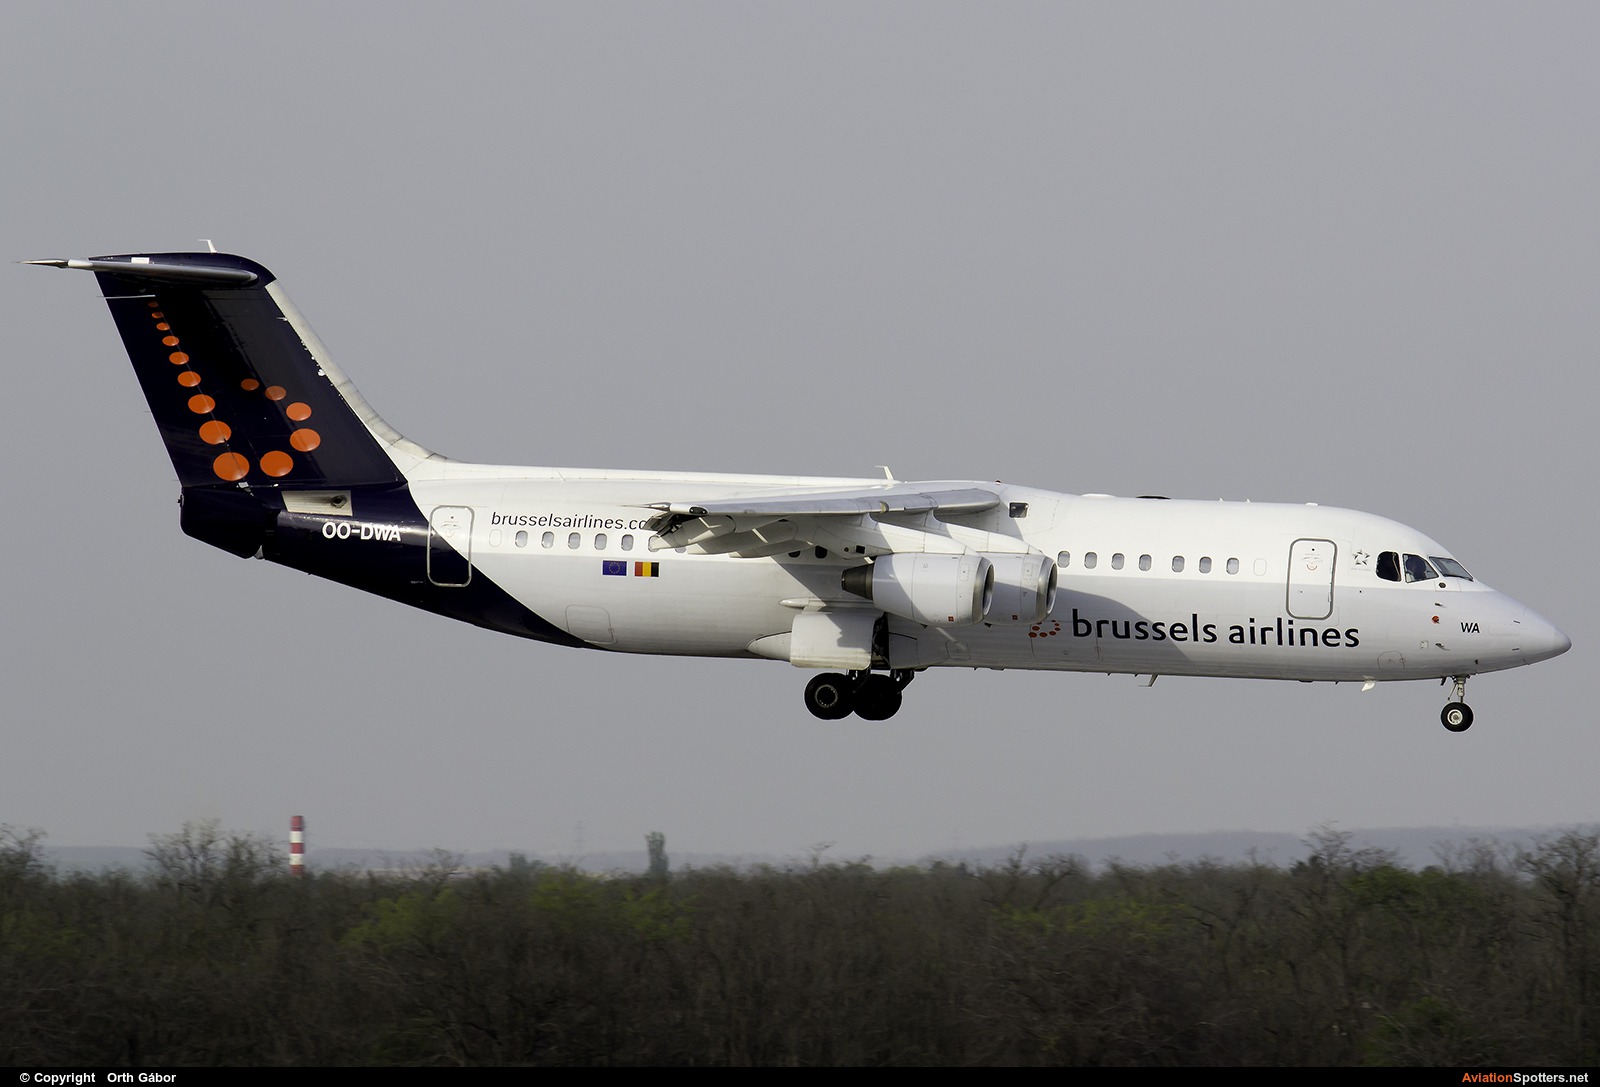 Brussels Airlines  -  BAe 146-300-Avro RJ100  (OO-DWA) By Orth Gábor (Roodkop)